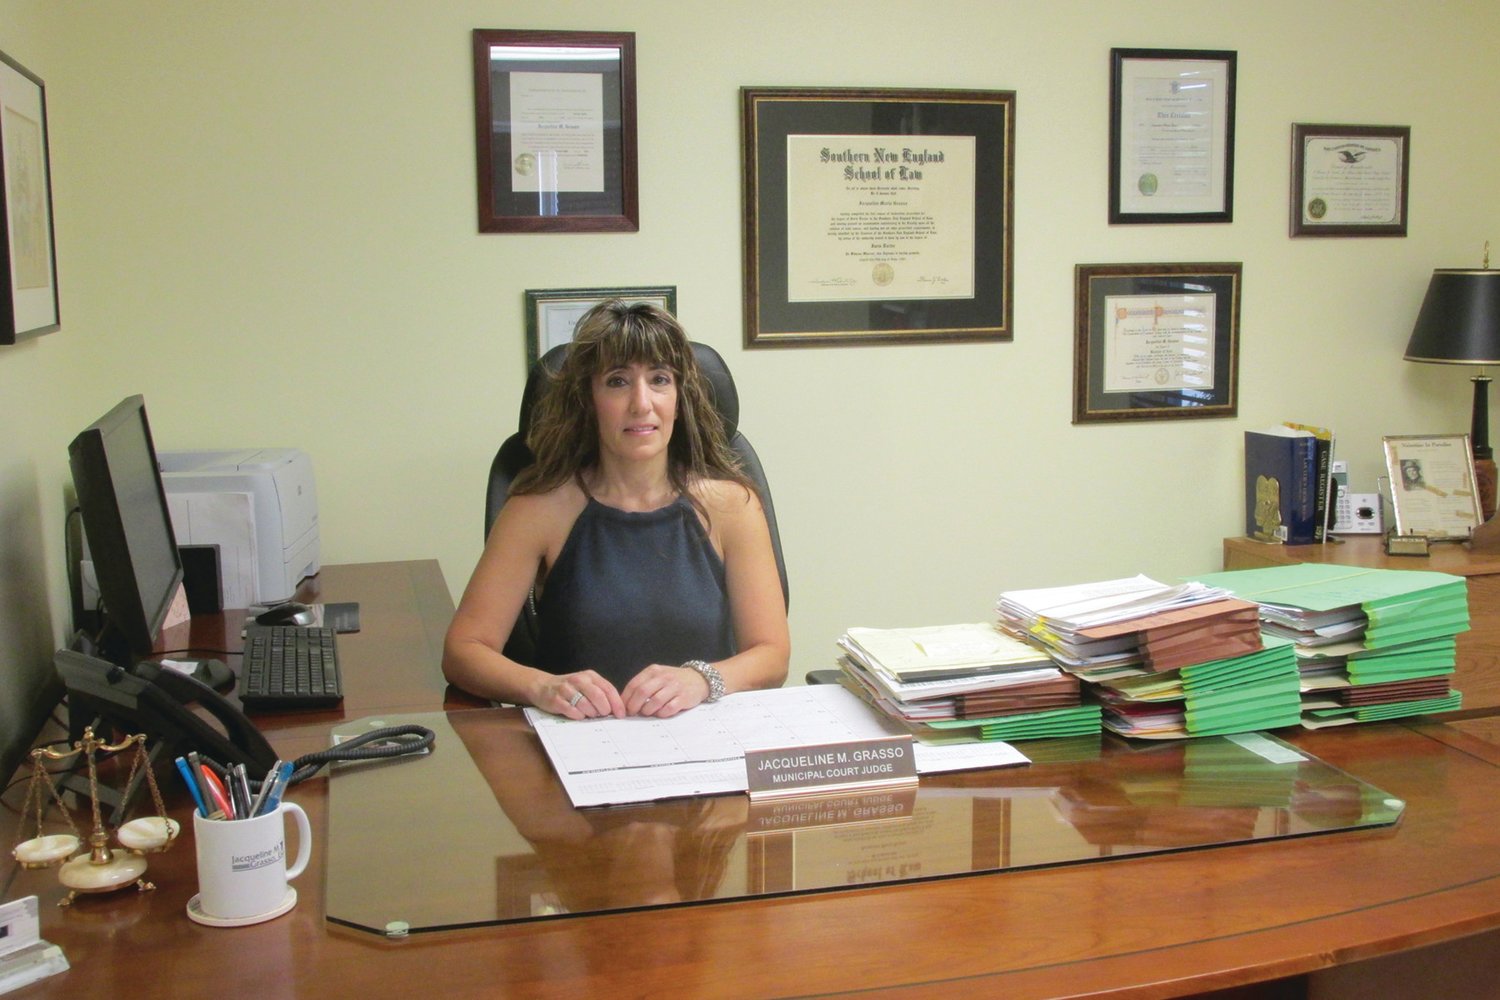 JOHNSTON JURIST: In this 2016 file photo, Attorney Jacqueline M. Grasso sits in her 1310 Atwood Ave. law office. Grasso served as Johnston’s Chief Municipal Court Judge for a decade prior to her replacement last week.